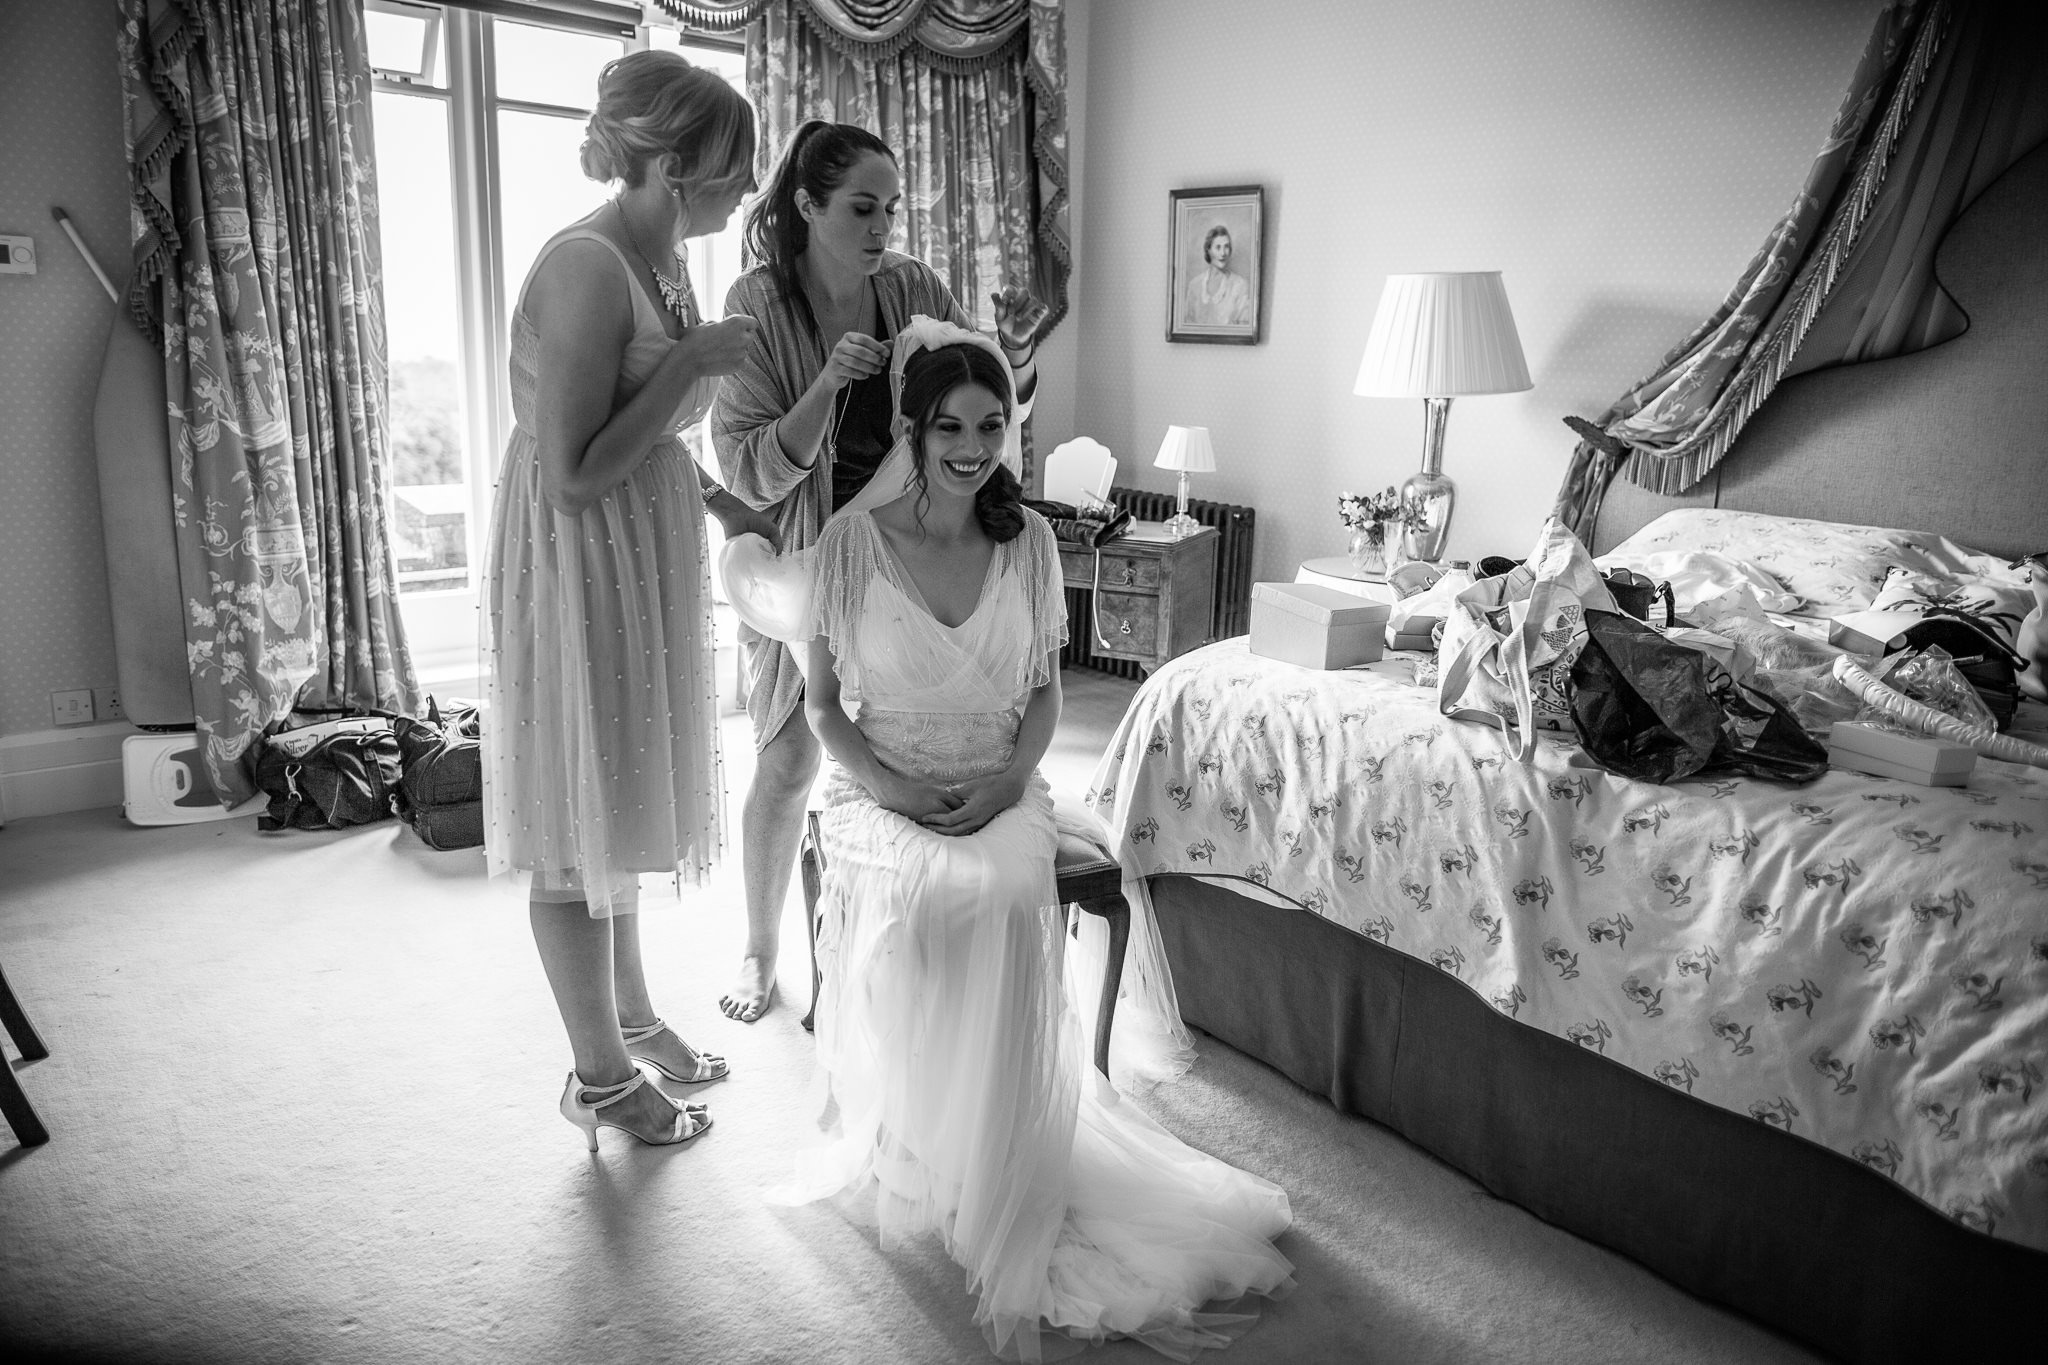  Final touches are applied to the bride’s hair before her wedding 